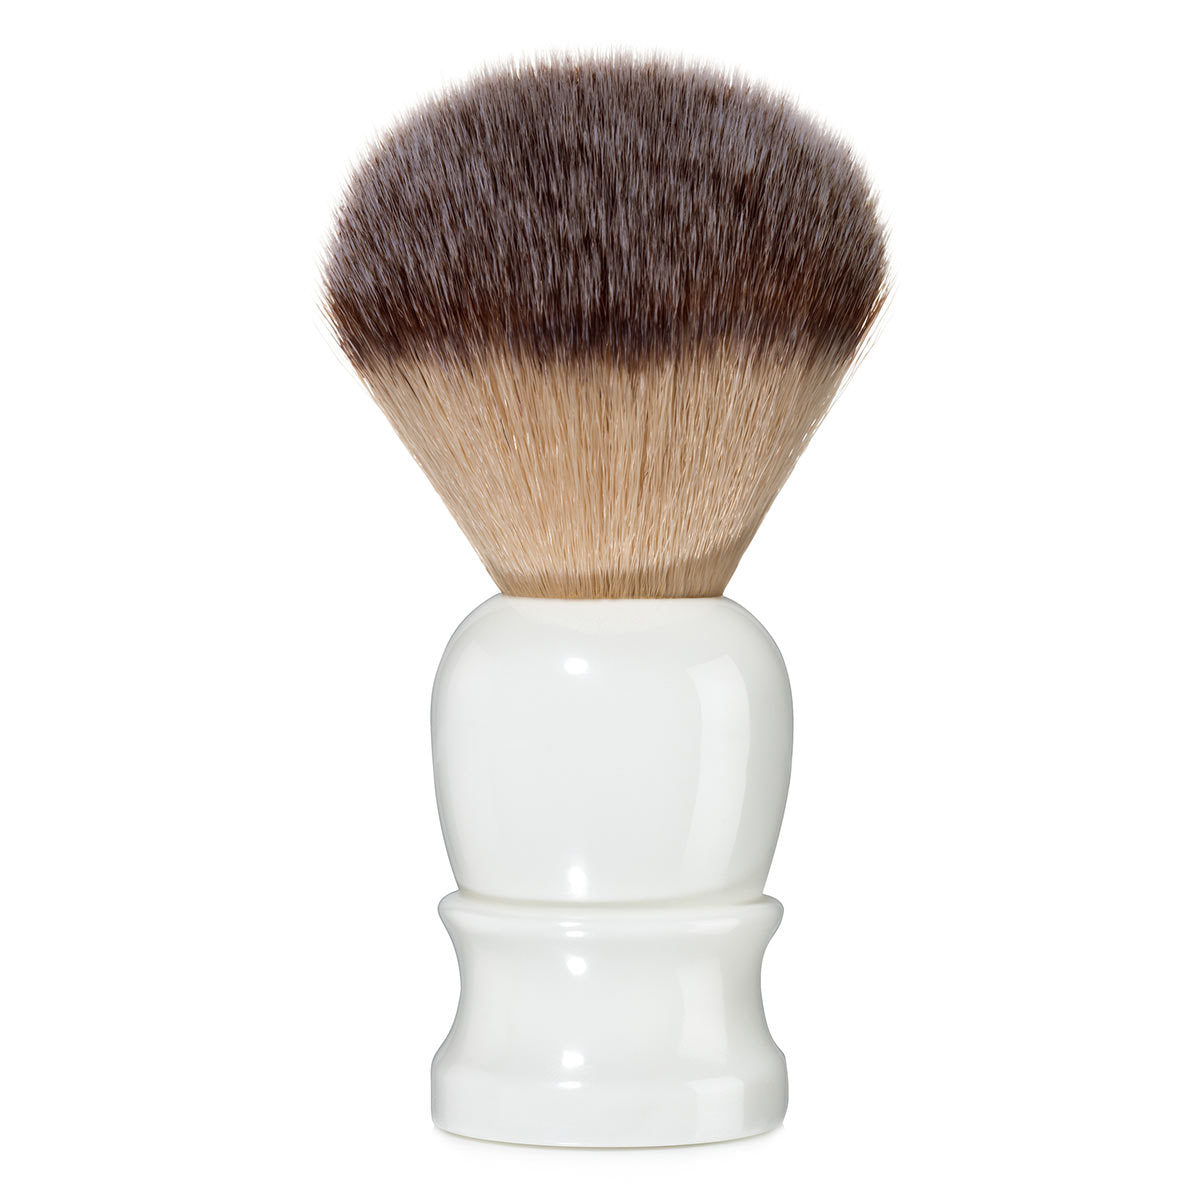 Primary image of Fine Accoutrements Classic Angel Hair Shave Brush - White 20mm Shave Brush